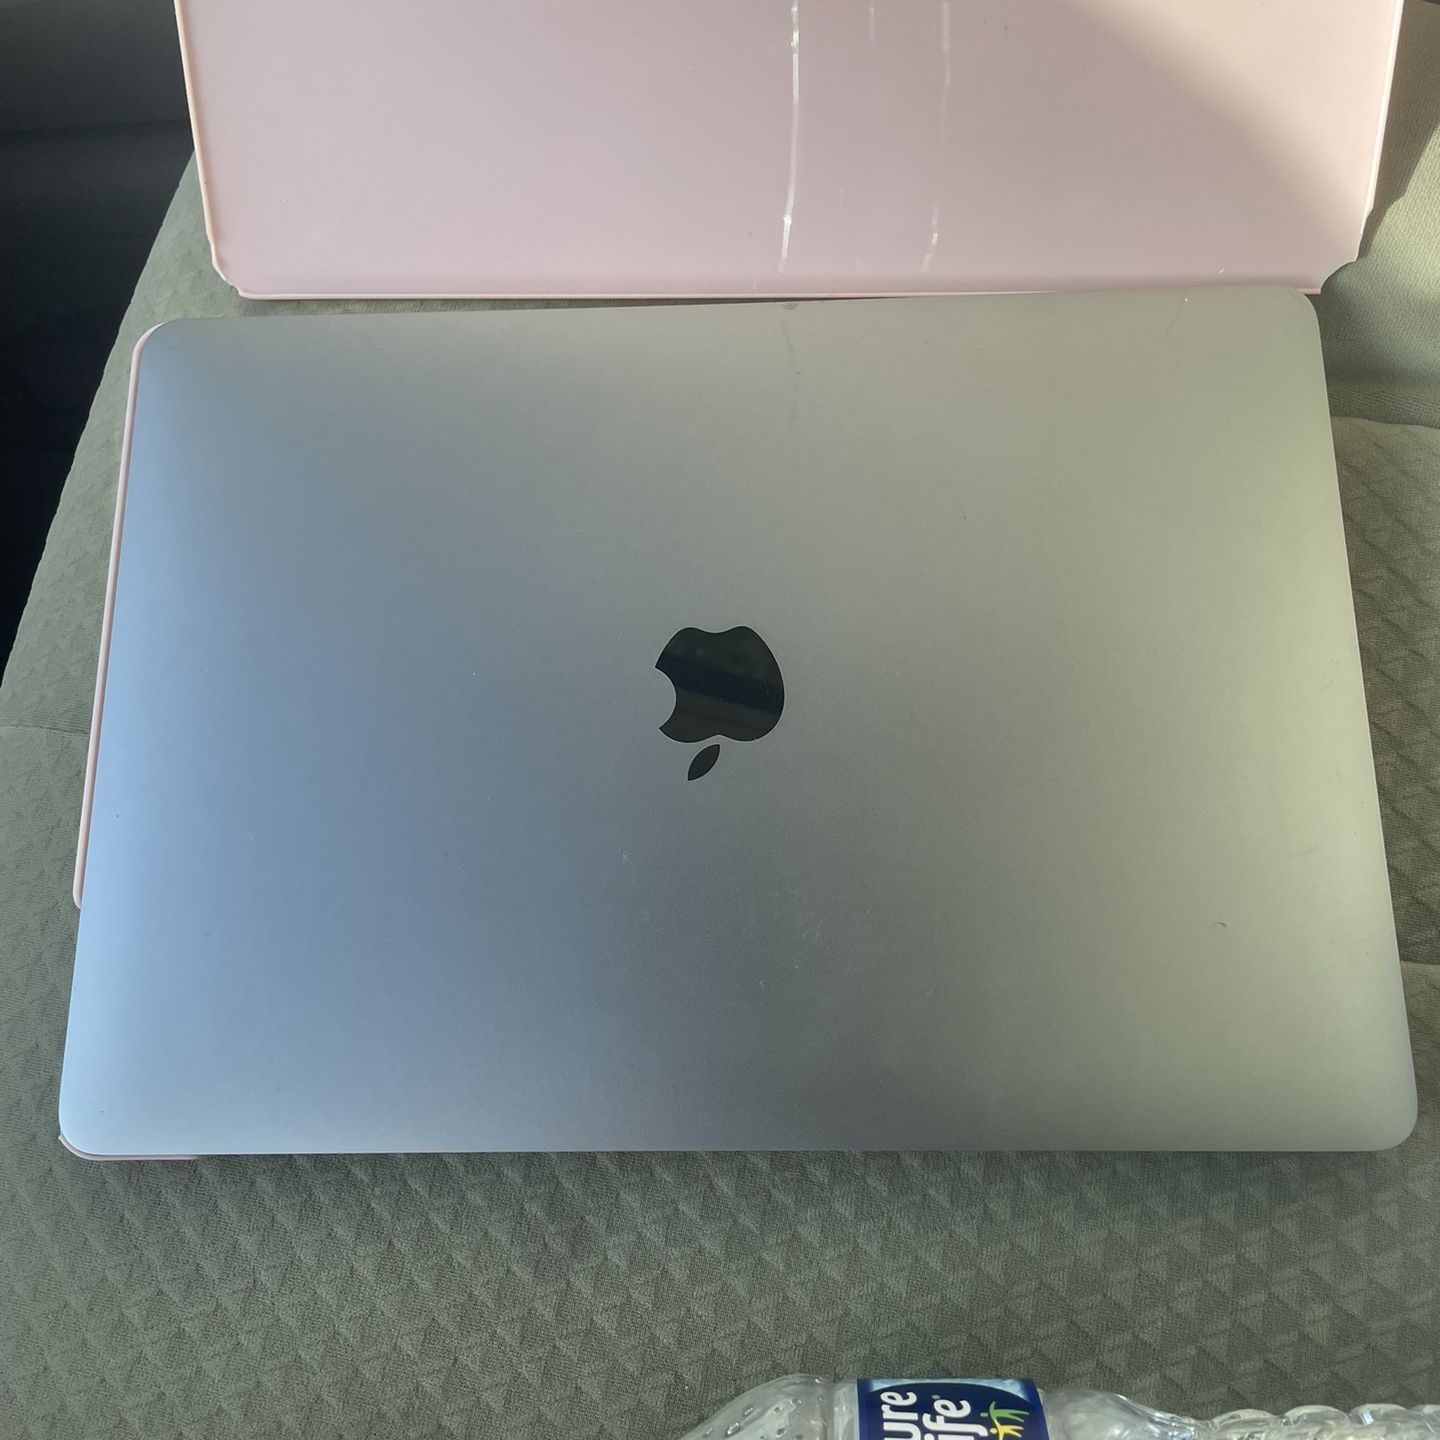 College Kids MacBook 2020 Rarely Used  (Cash Only)